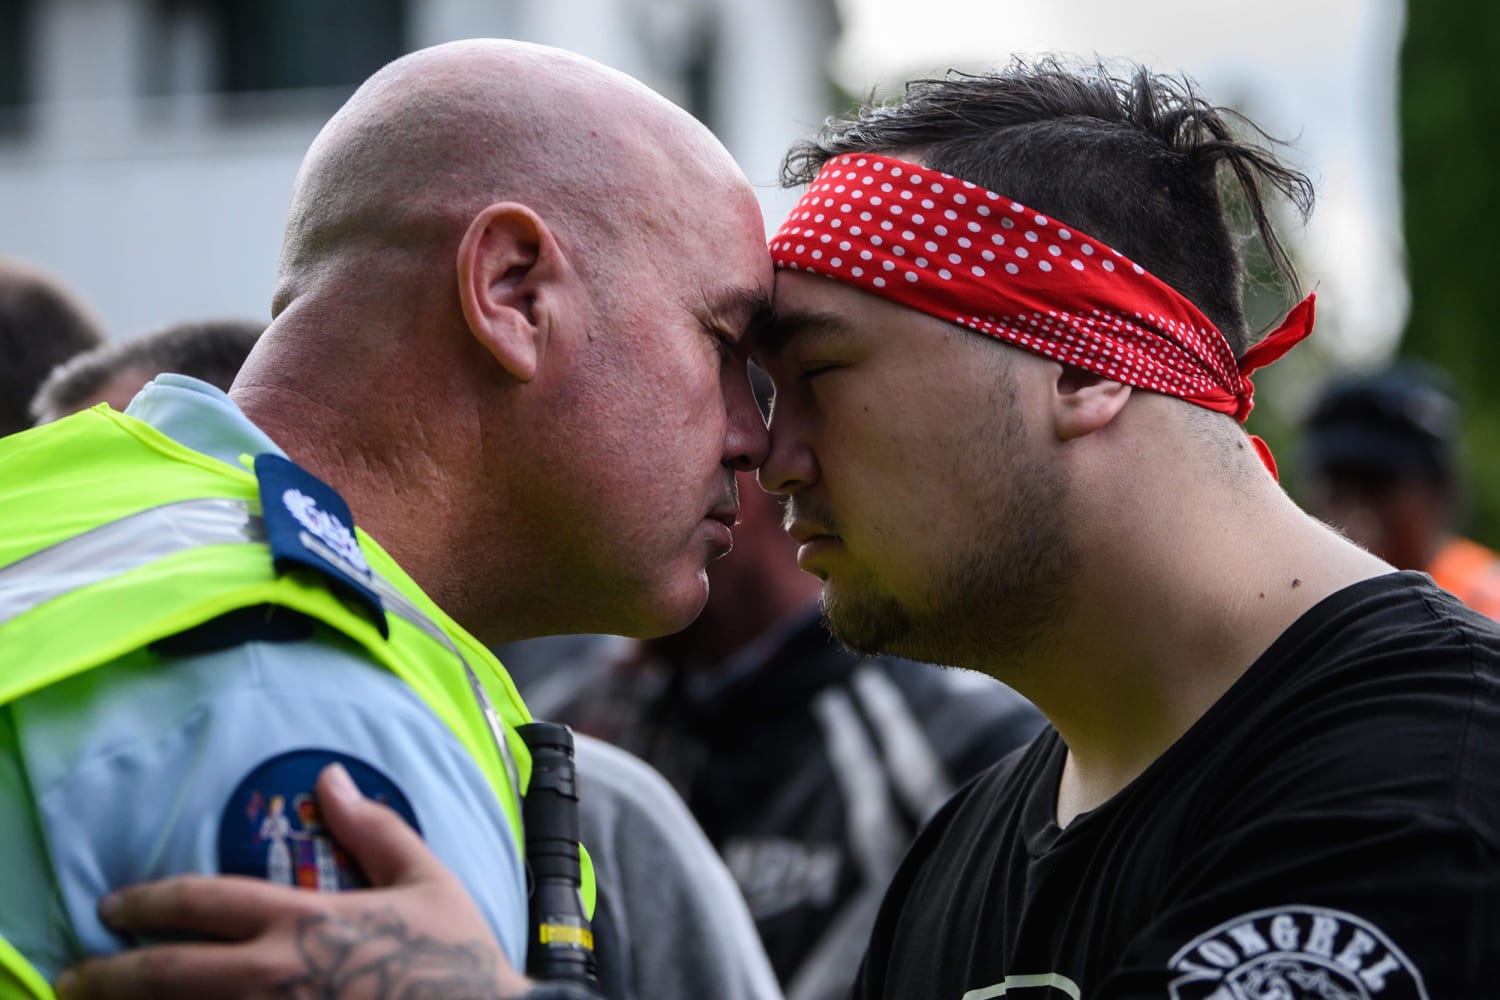 New Zealand Shooting Haka Ring Out As Country Copes With Trauma